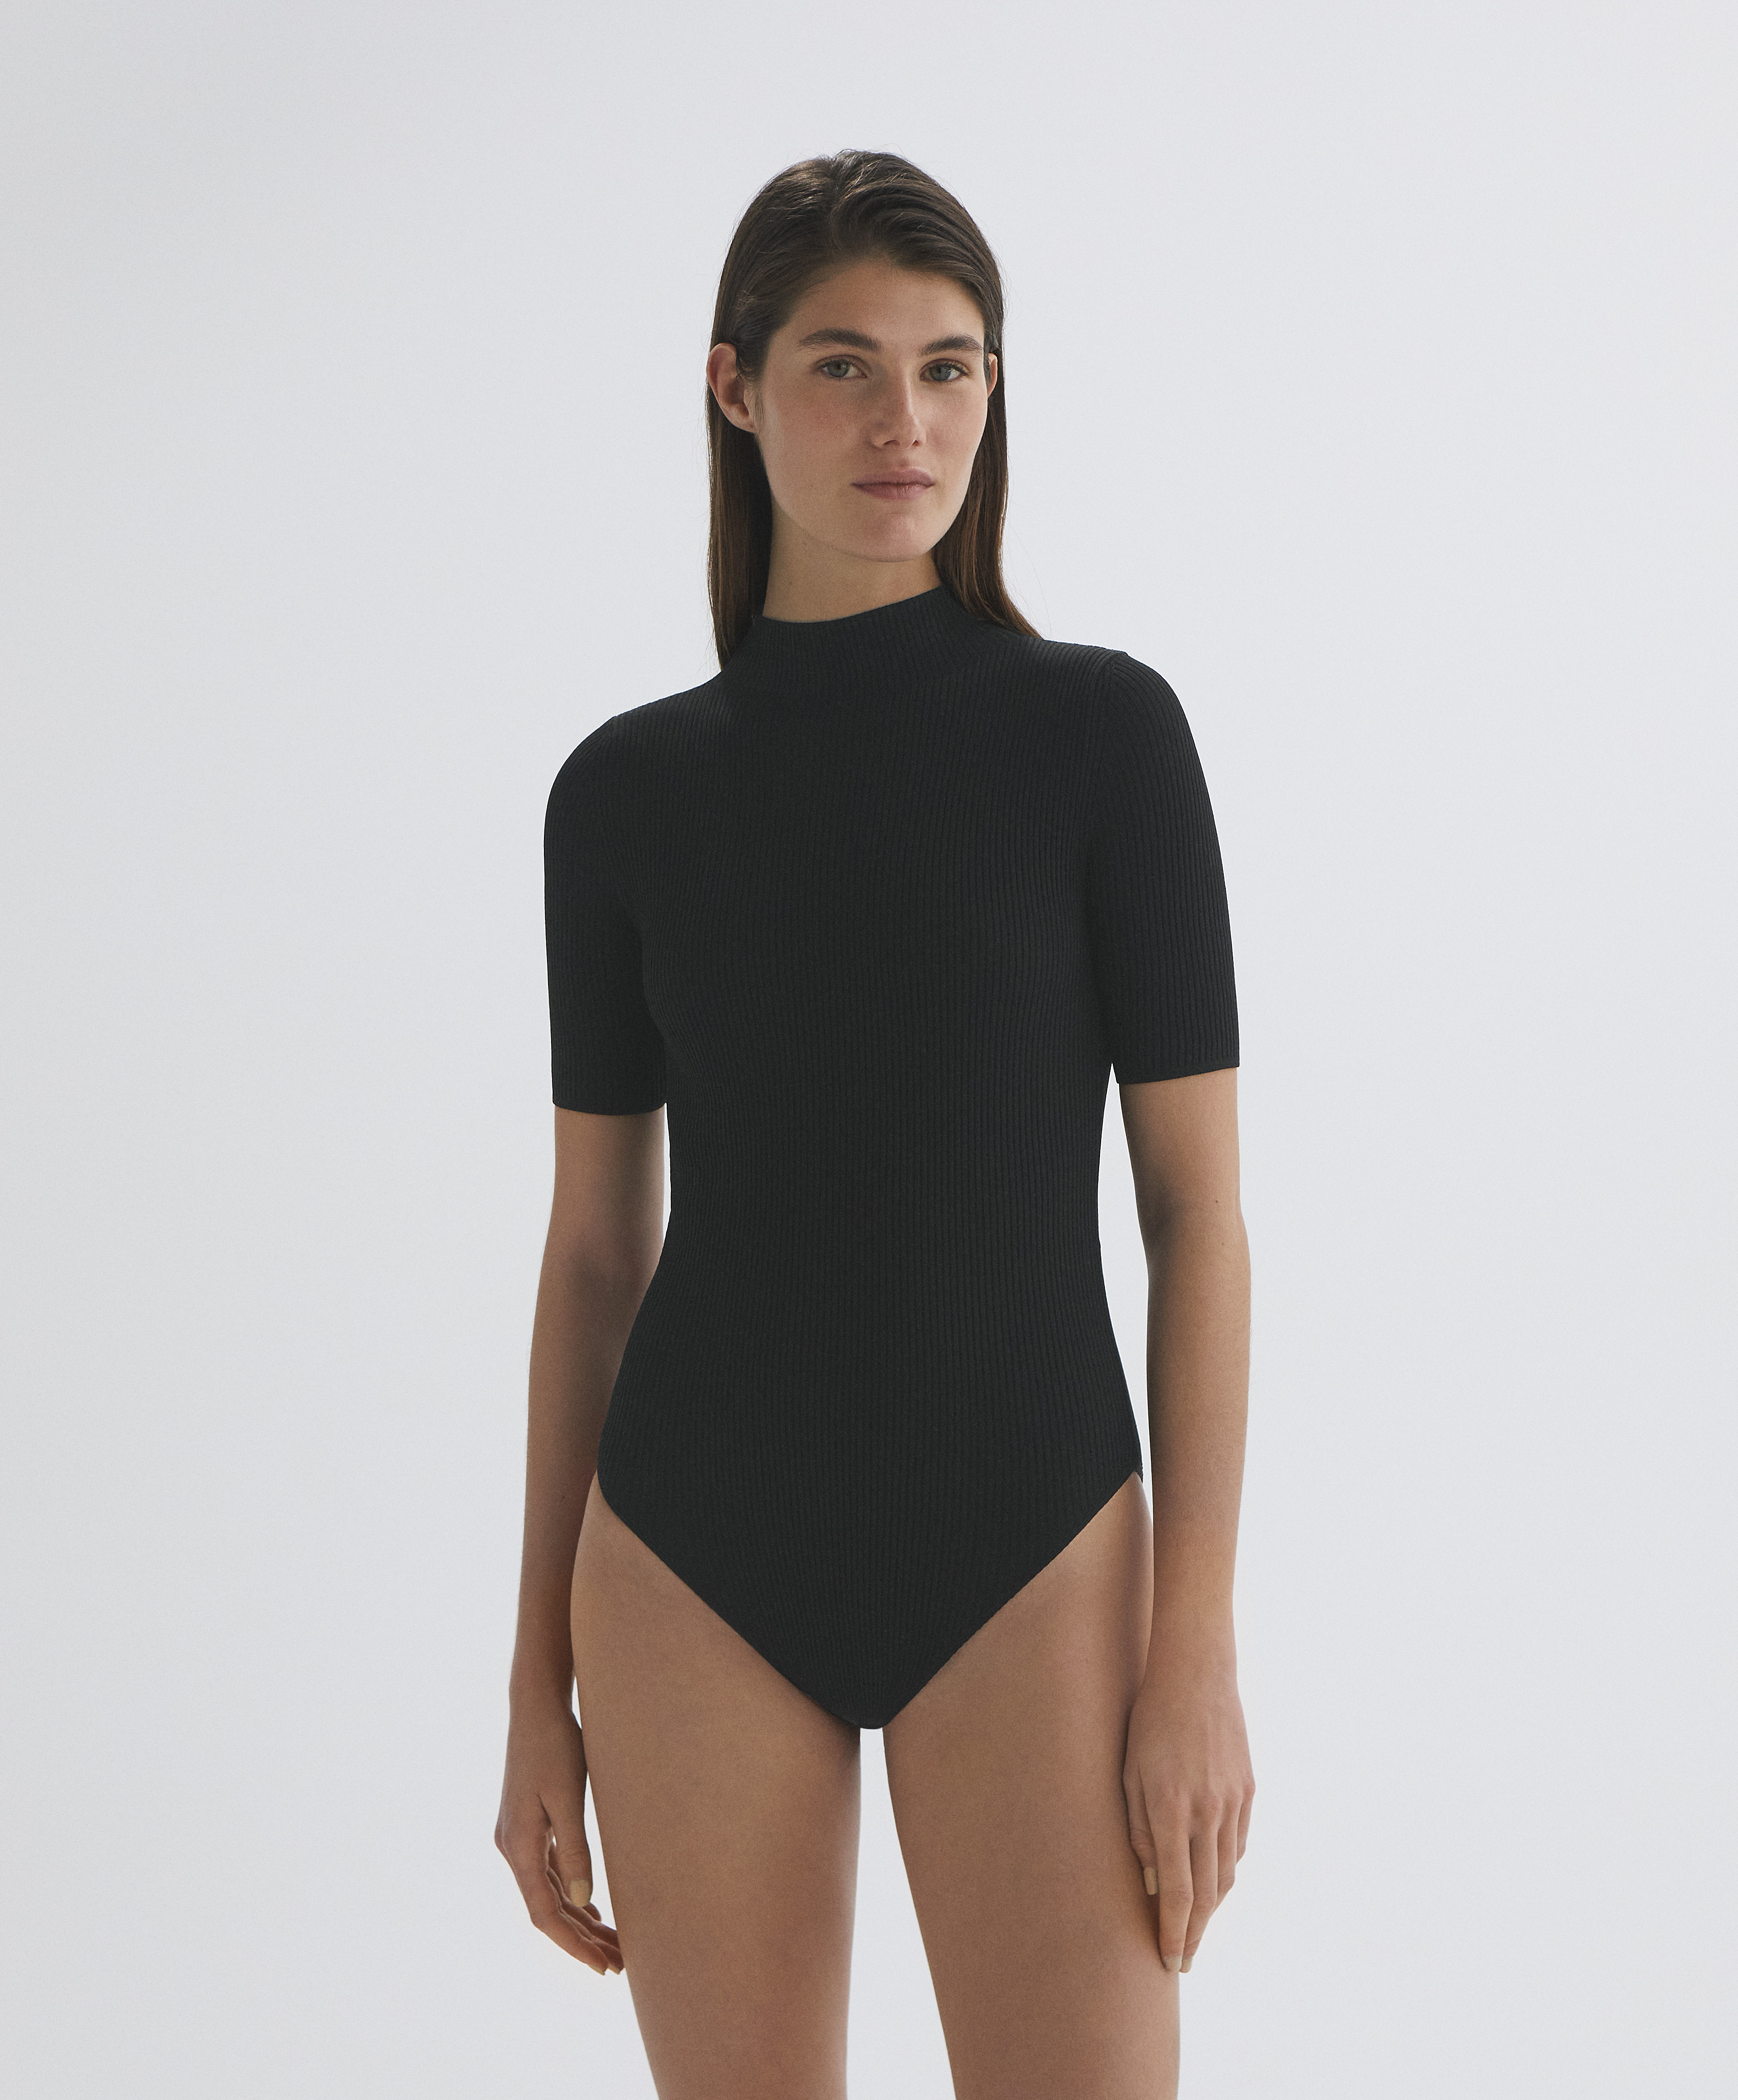 Ribbed high neck bodysuit - Join life ...